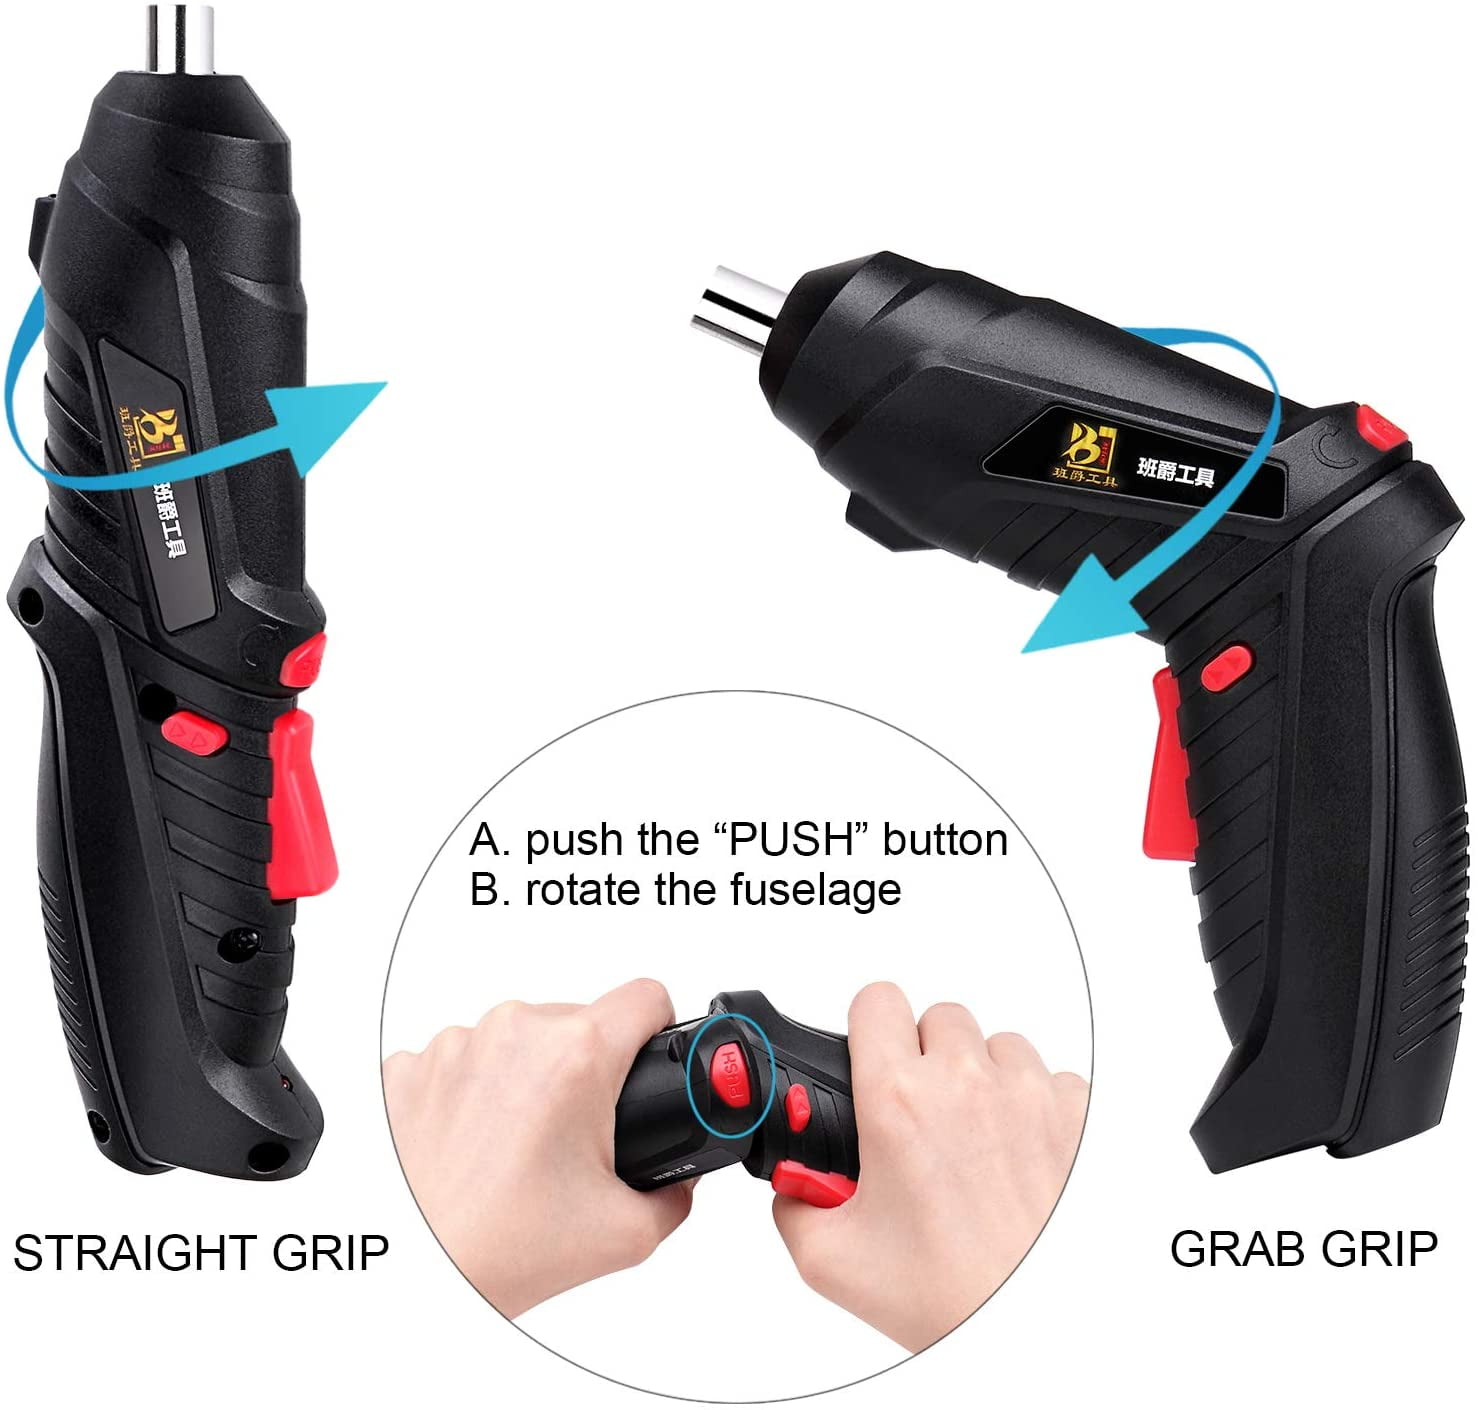 MOPHOTO 3.6-Volt 3 Position Cordless Rechargeable Screwdriver Electric Screwdriver Drill Bit Kit Set In-built with Flashlight 46-In-1 